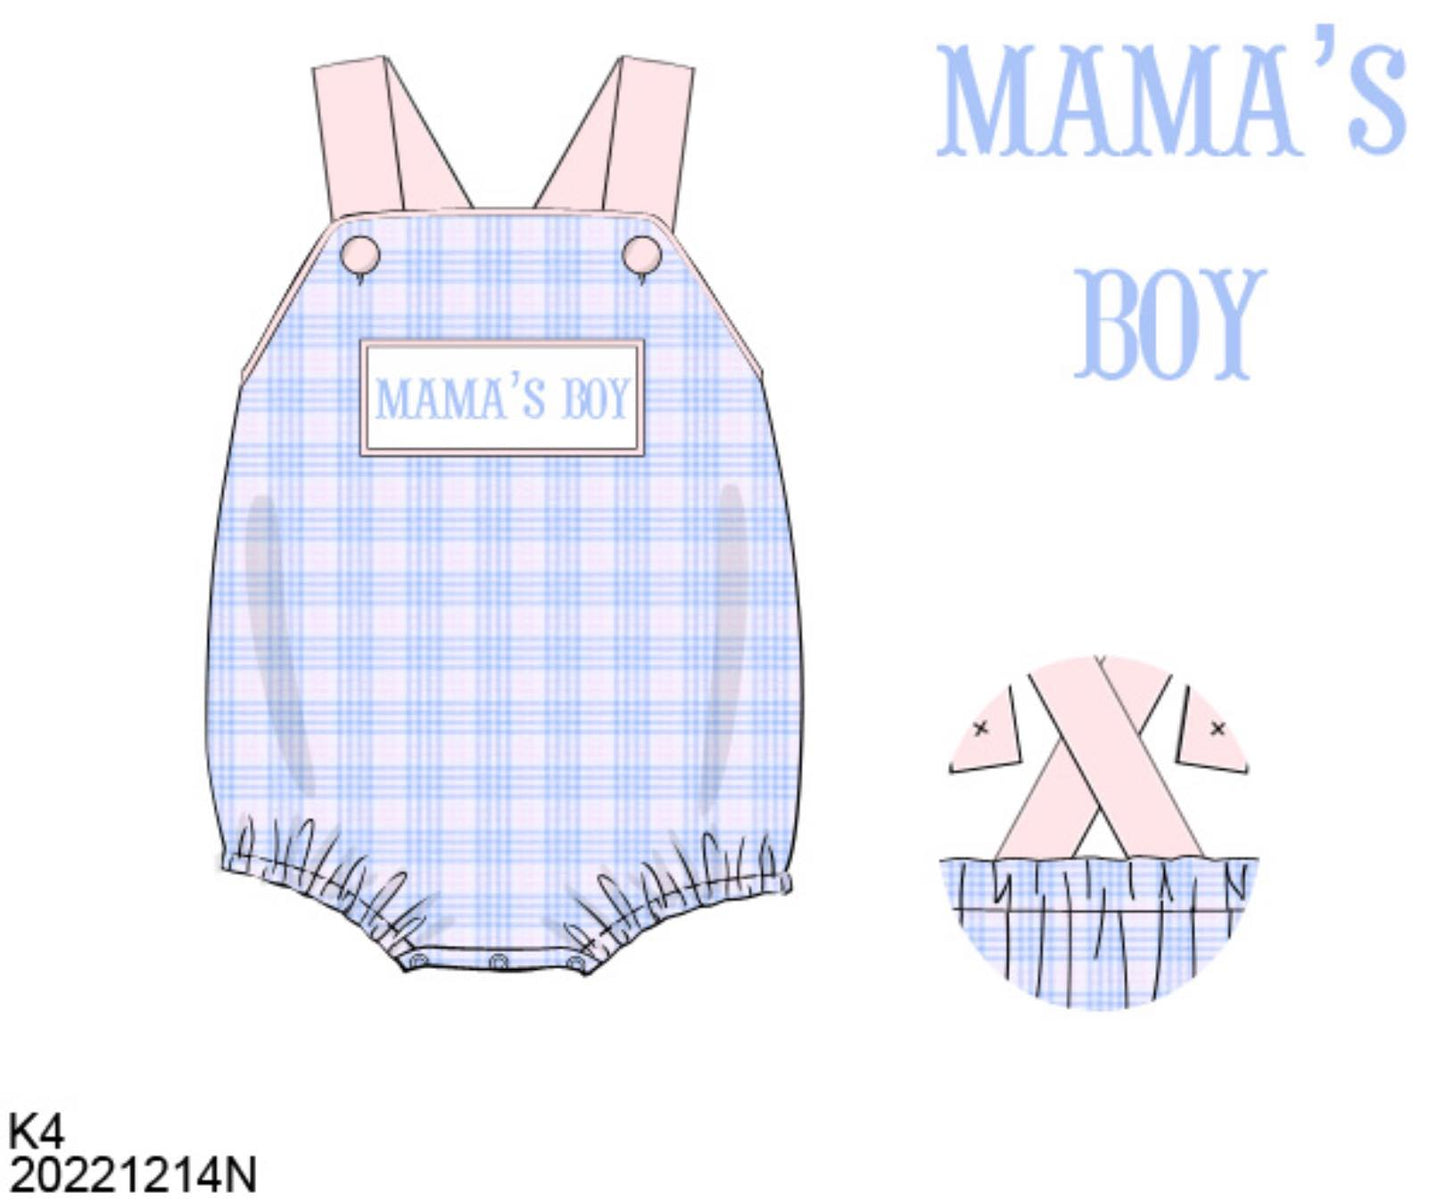 RTS: Mother's Day Name Smocks- "MAMA'S BOY" Pink & Blue Plaid Seersucker Bubble